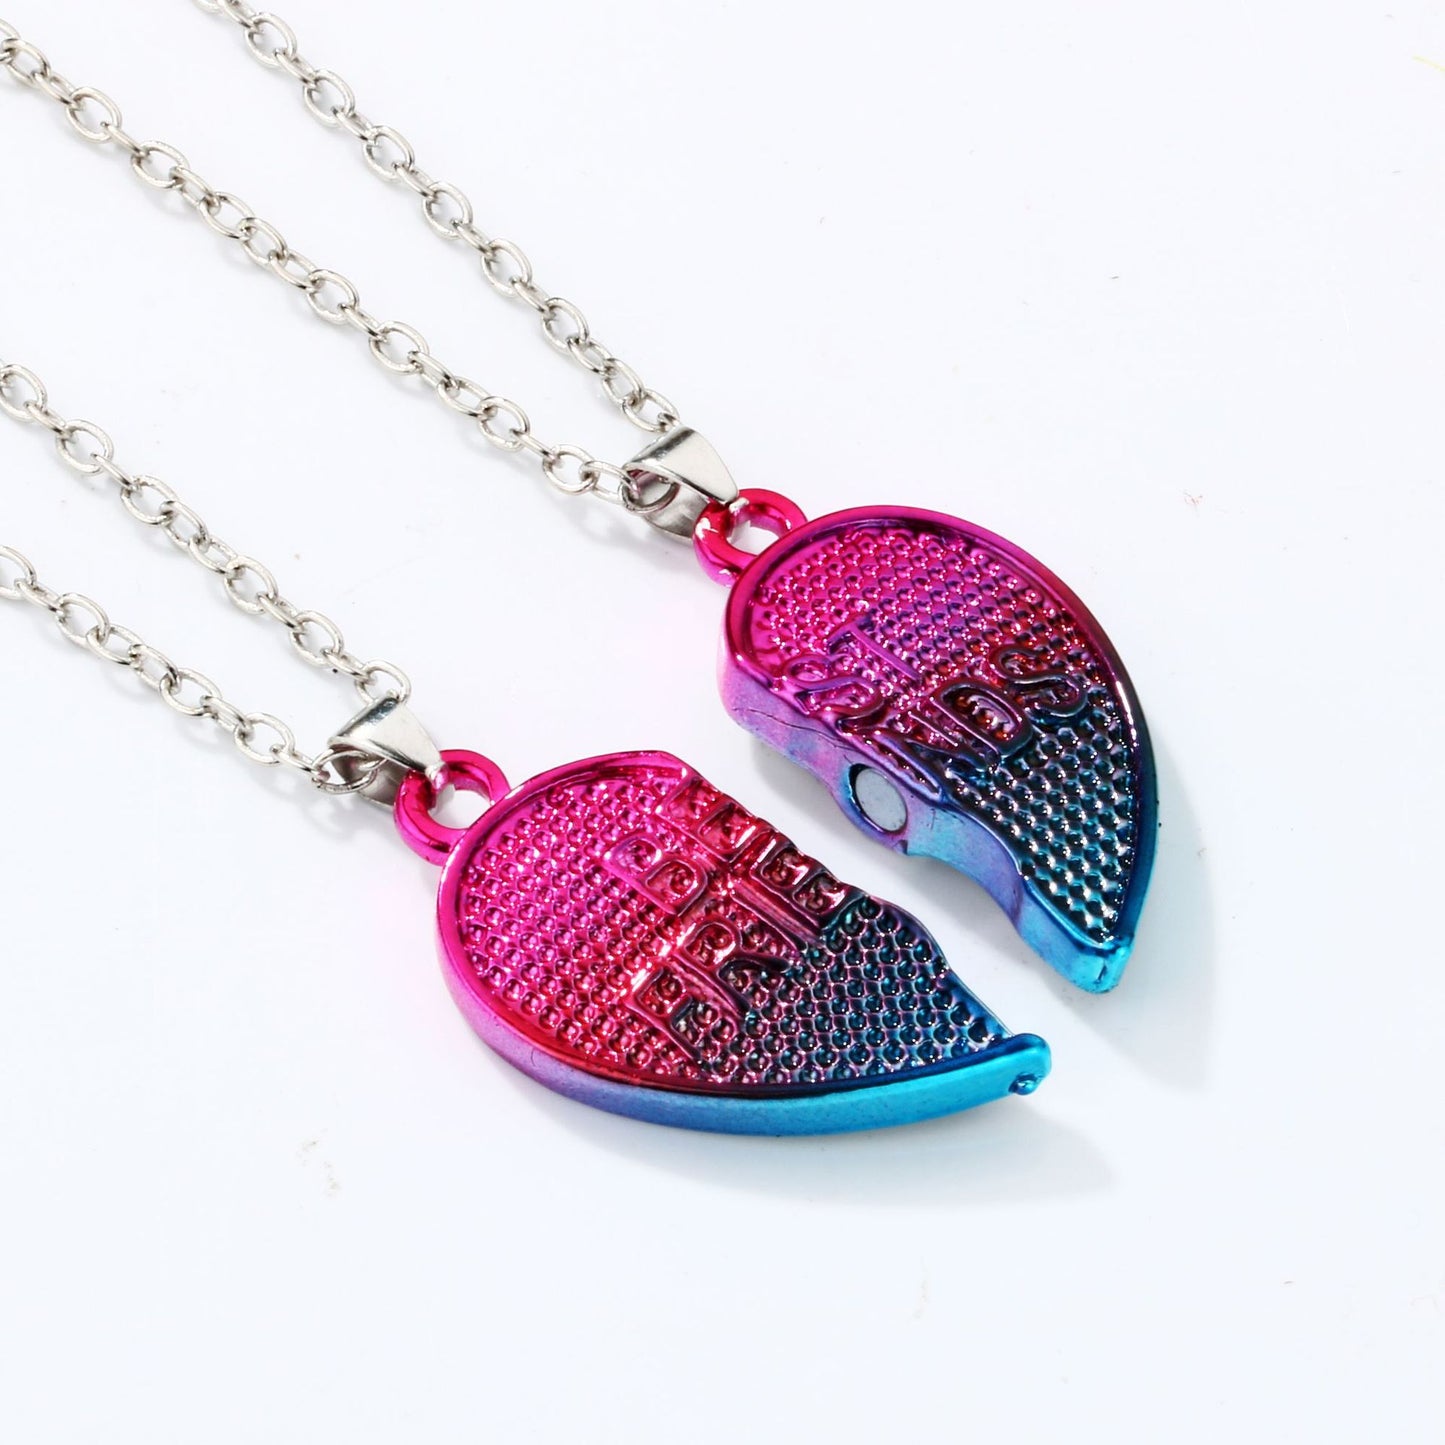 Magnetic Hearts Best Friends Necklaces Set for Two